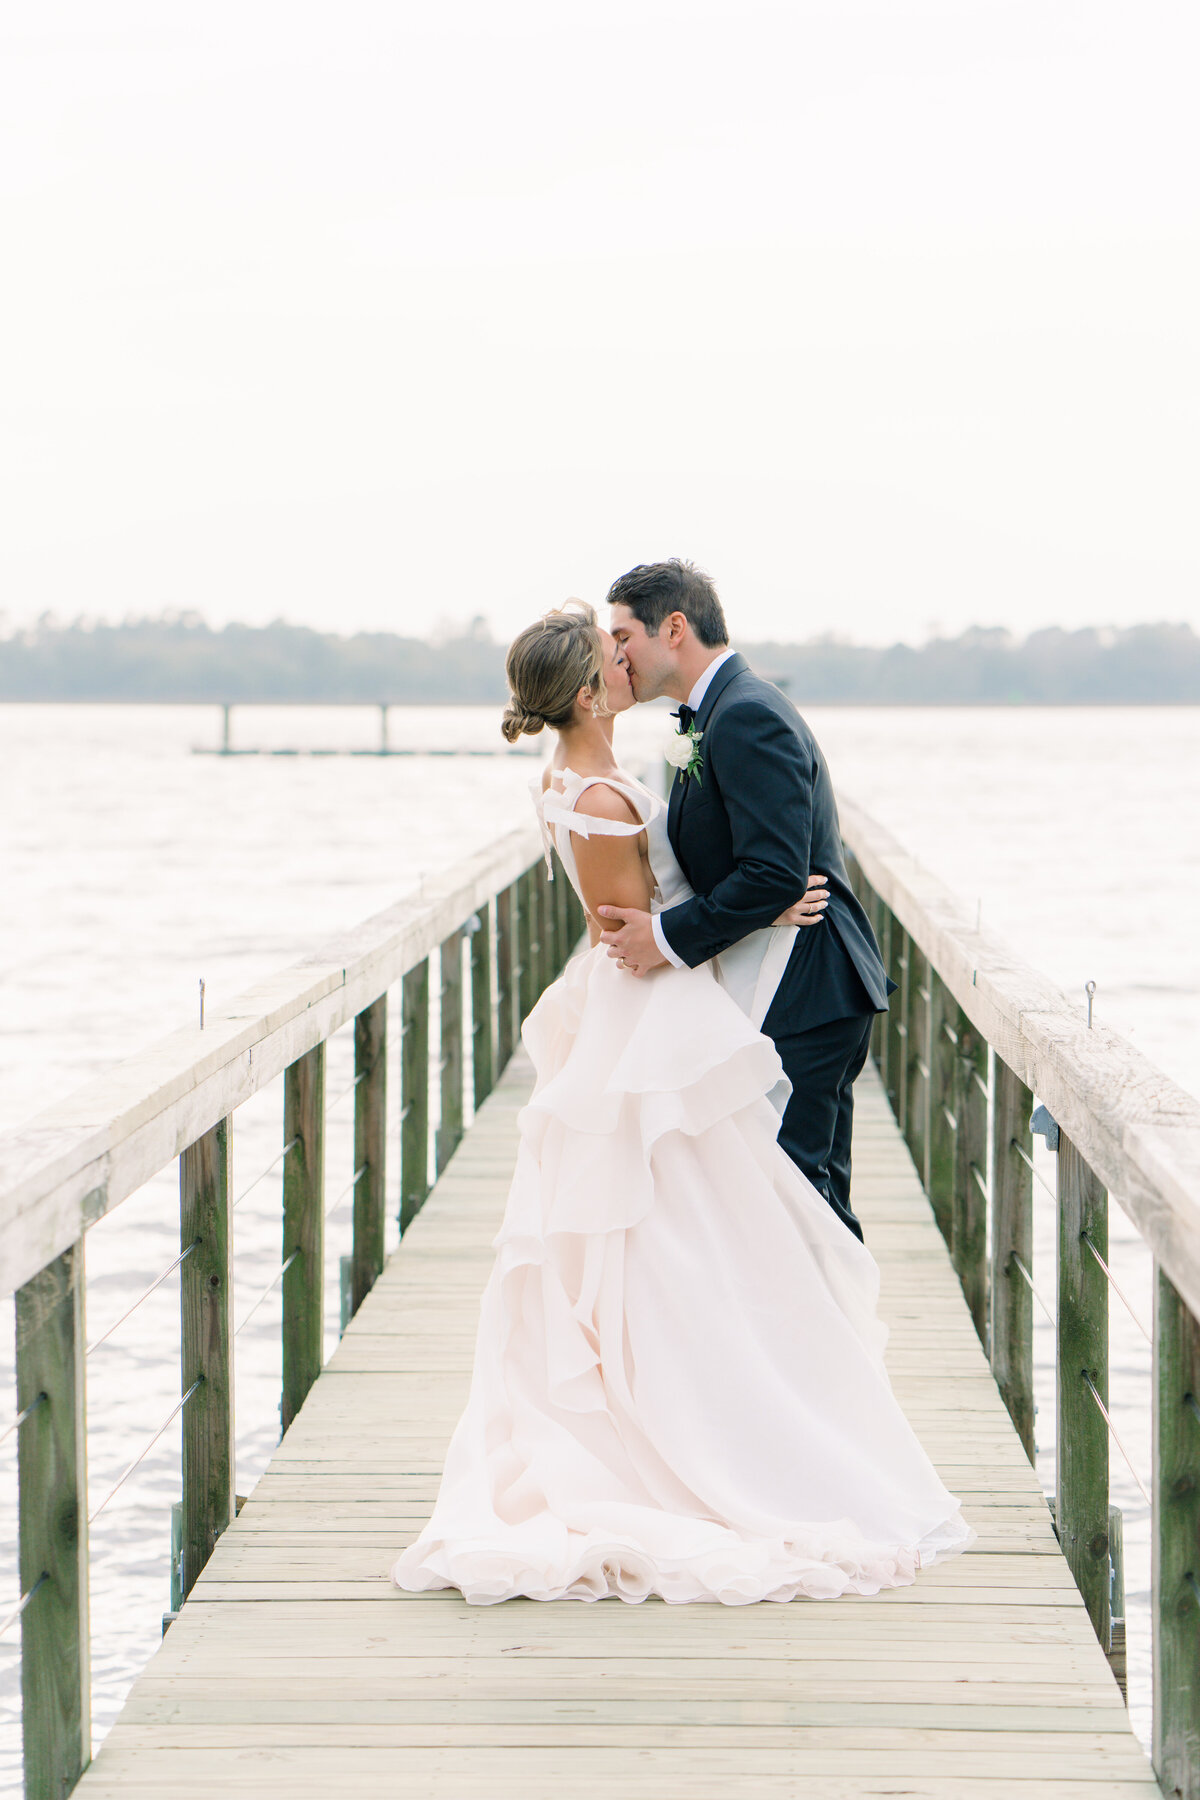 Lowndes Grove bride and groom kissing on the dock. Charleston film photographer.